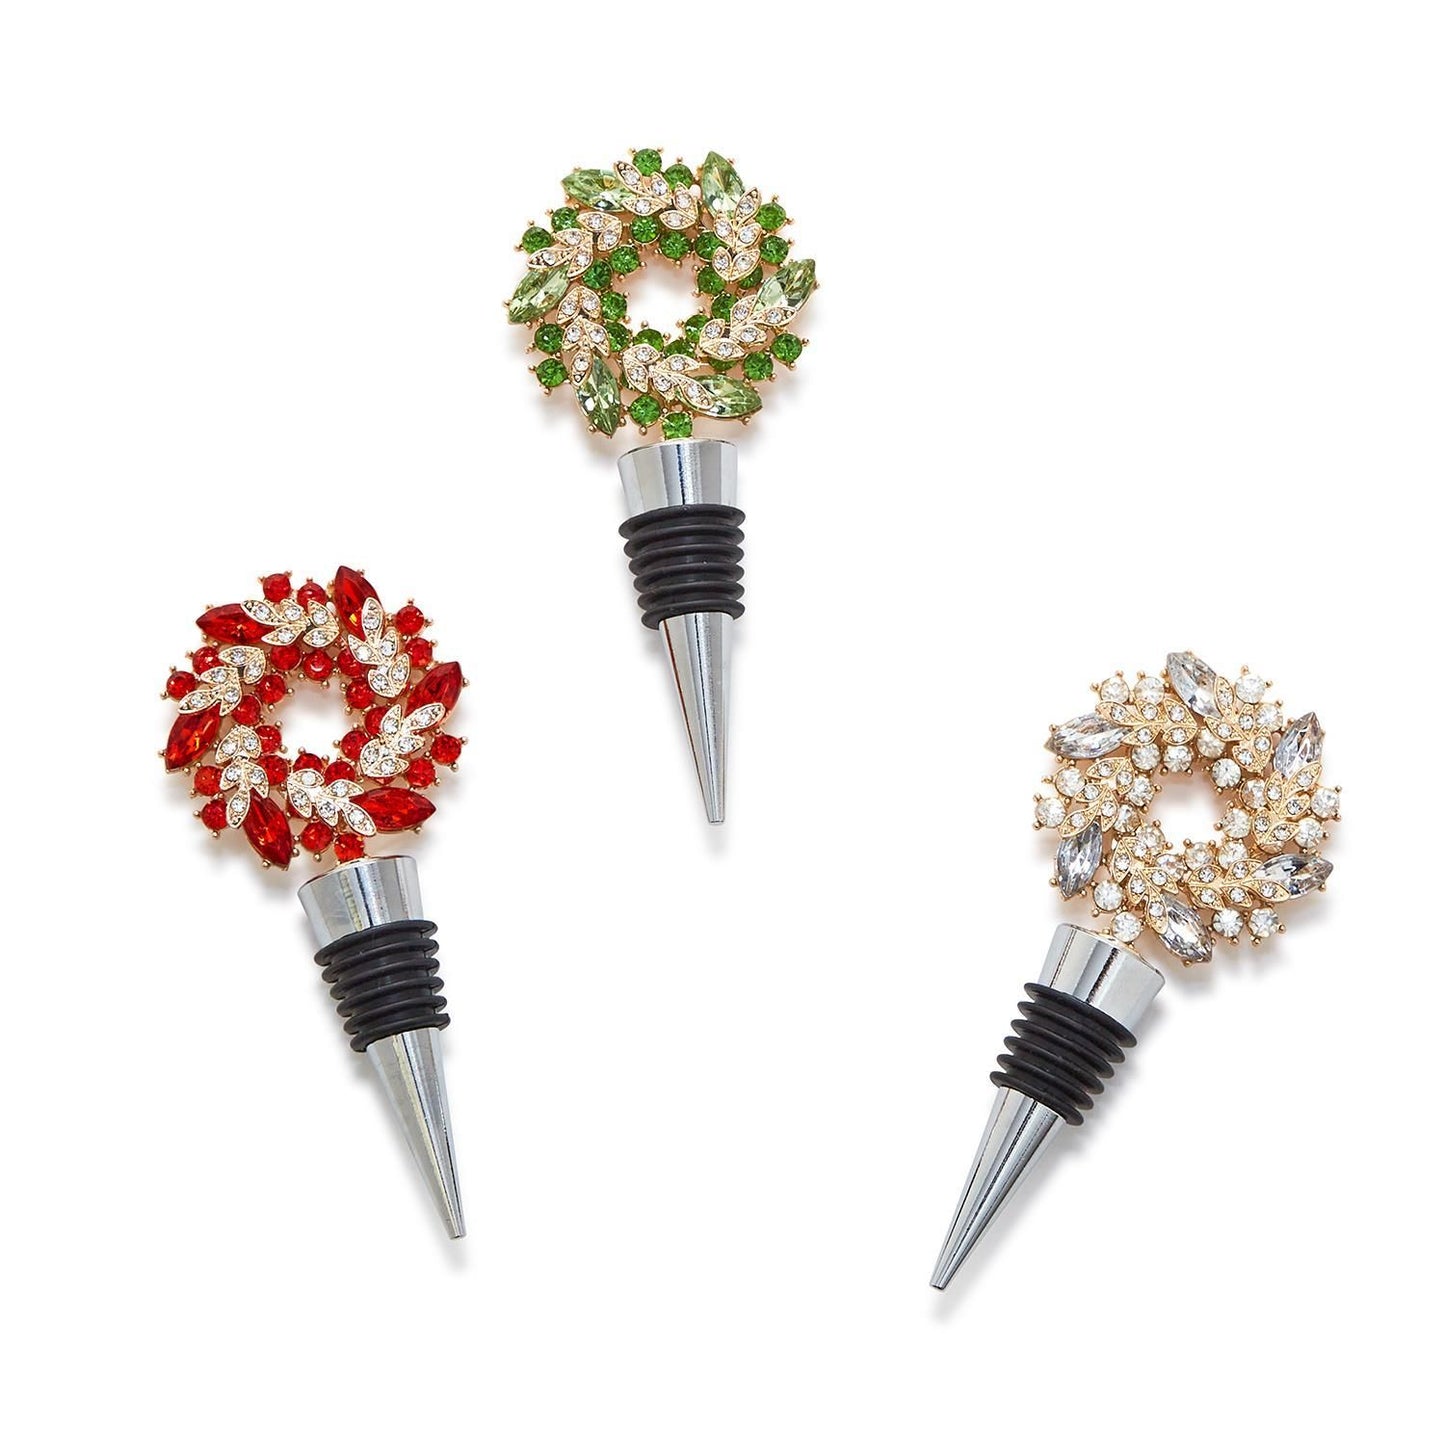 Two's Holiday Wreath Jeweled Bottle Stoppers In Gift Box Assorted 3 Colors